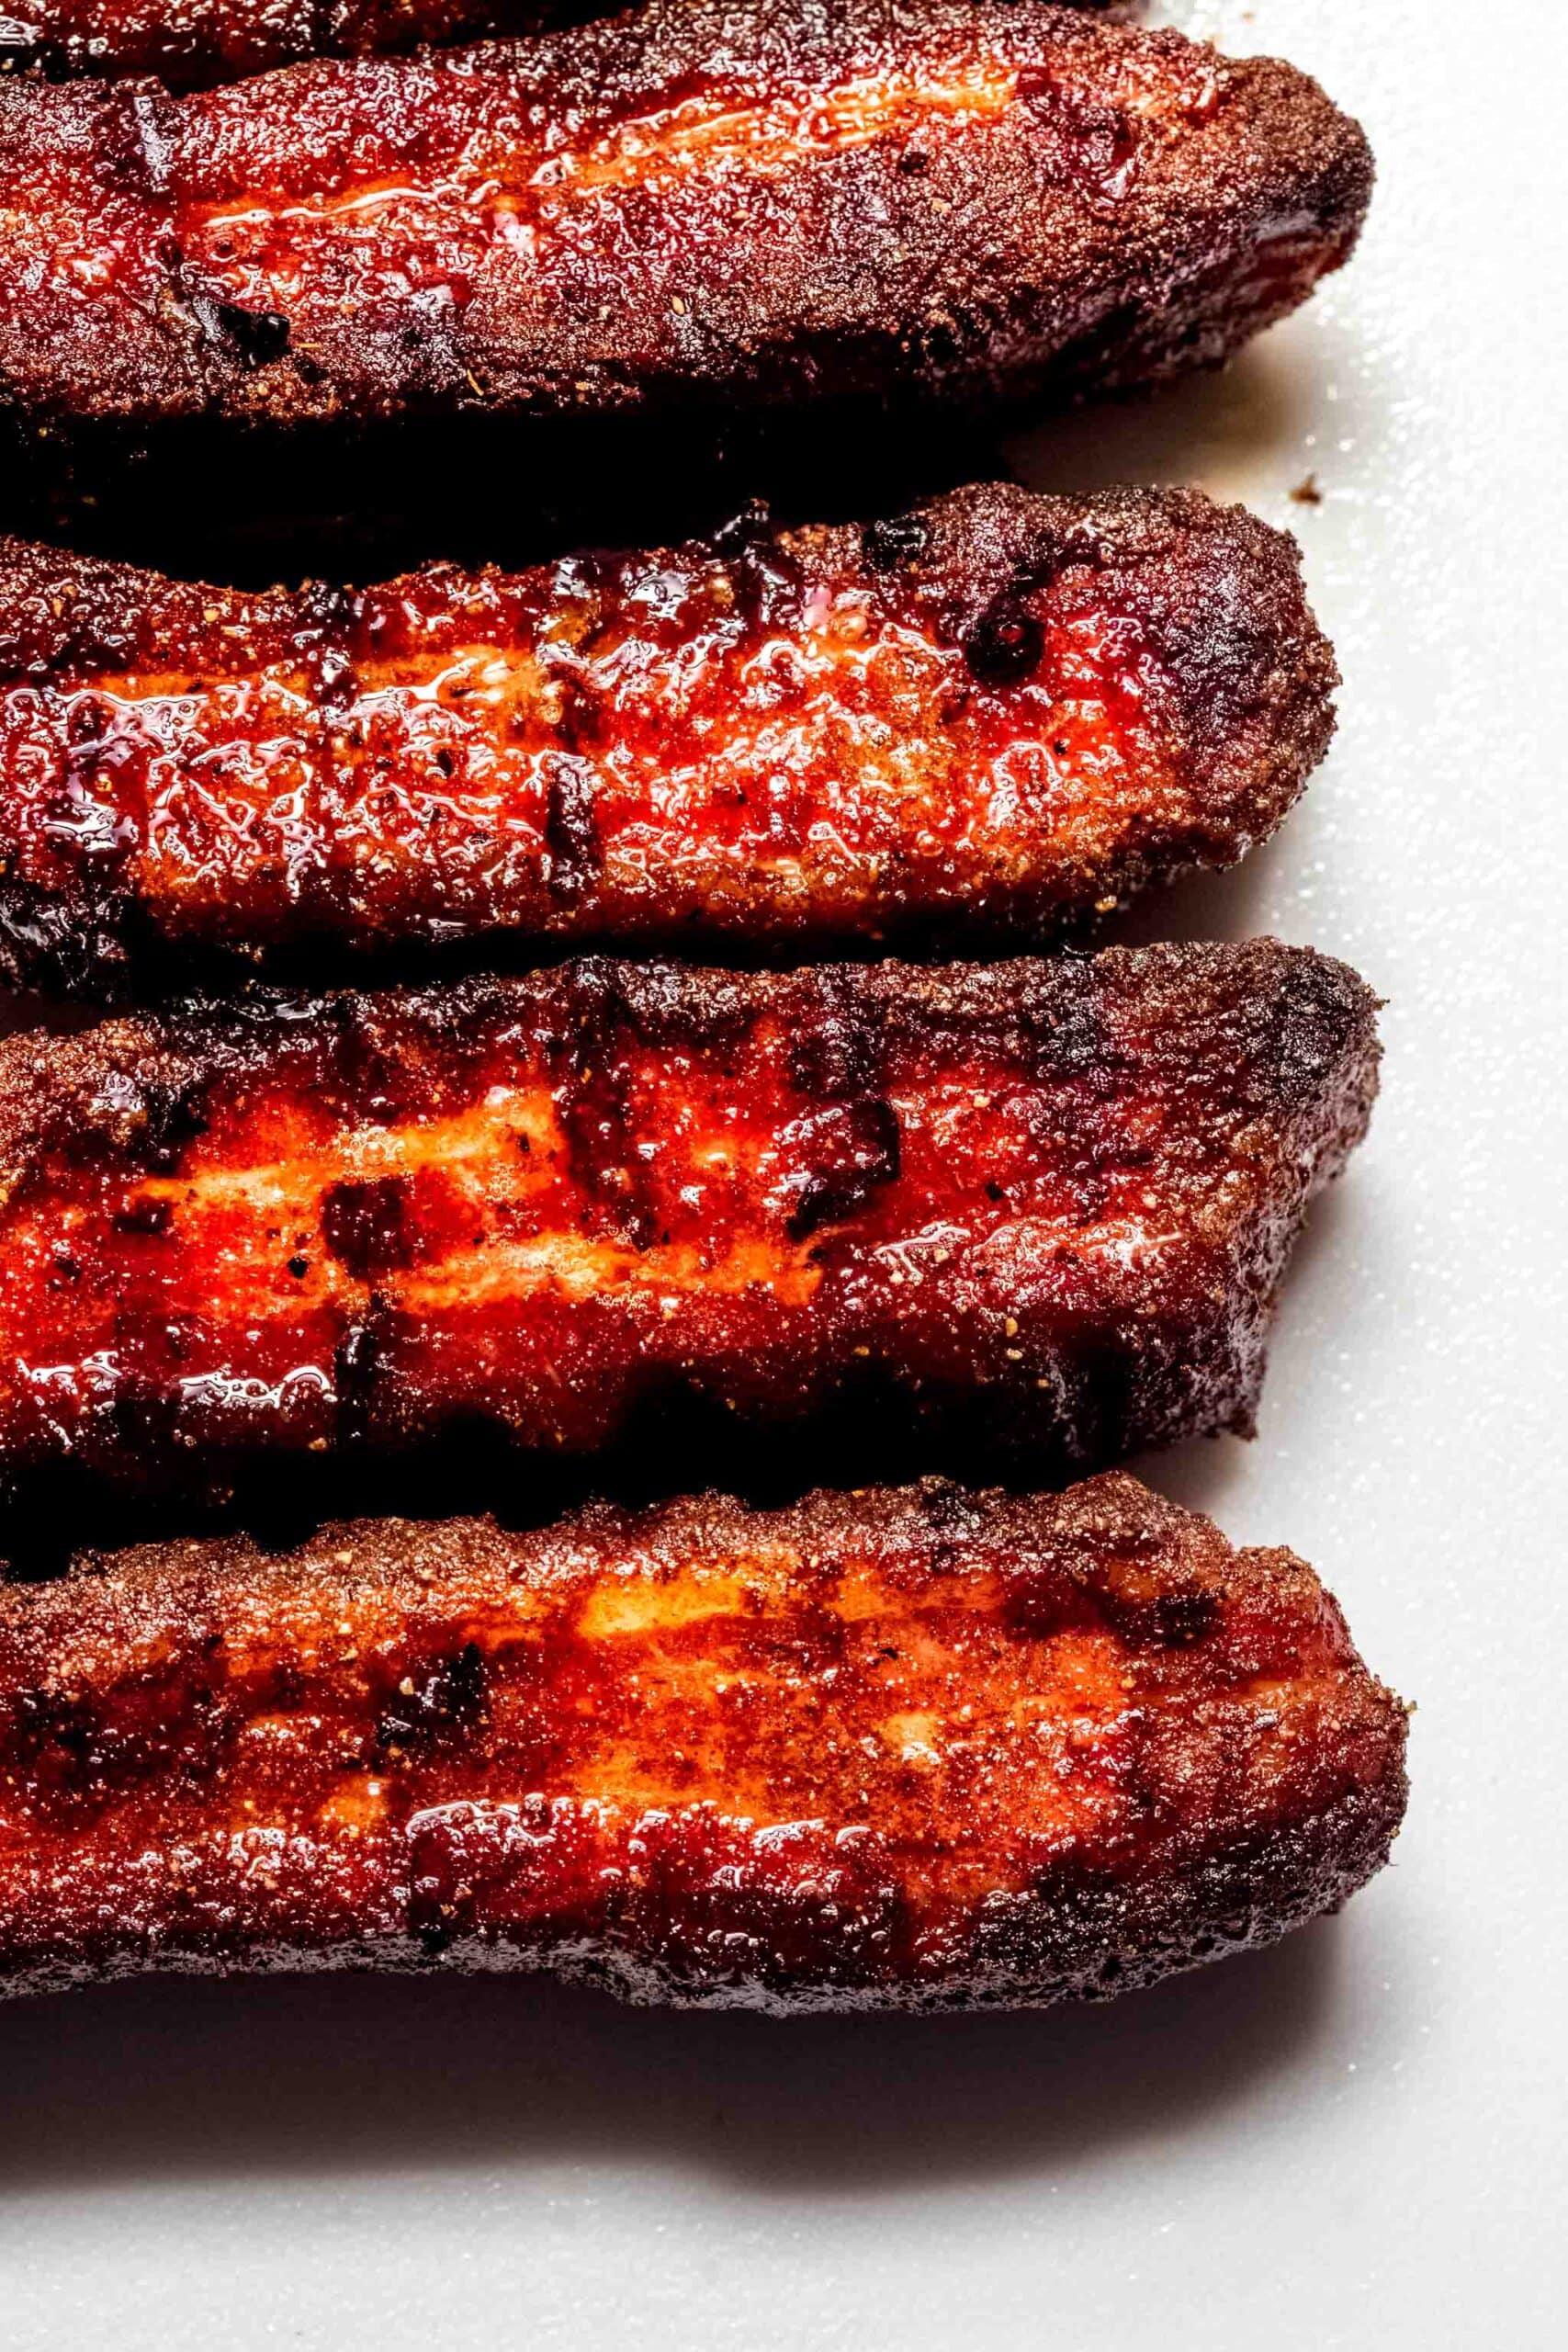 Four pieces of smoked pork belly on white background.